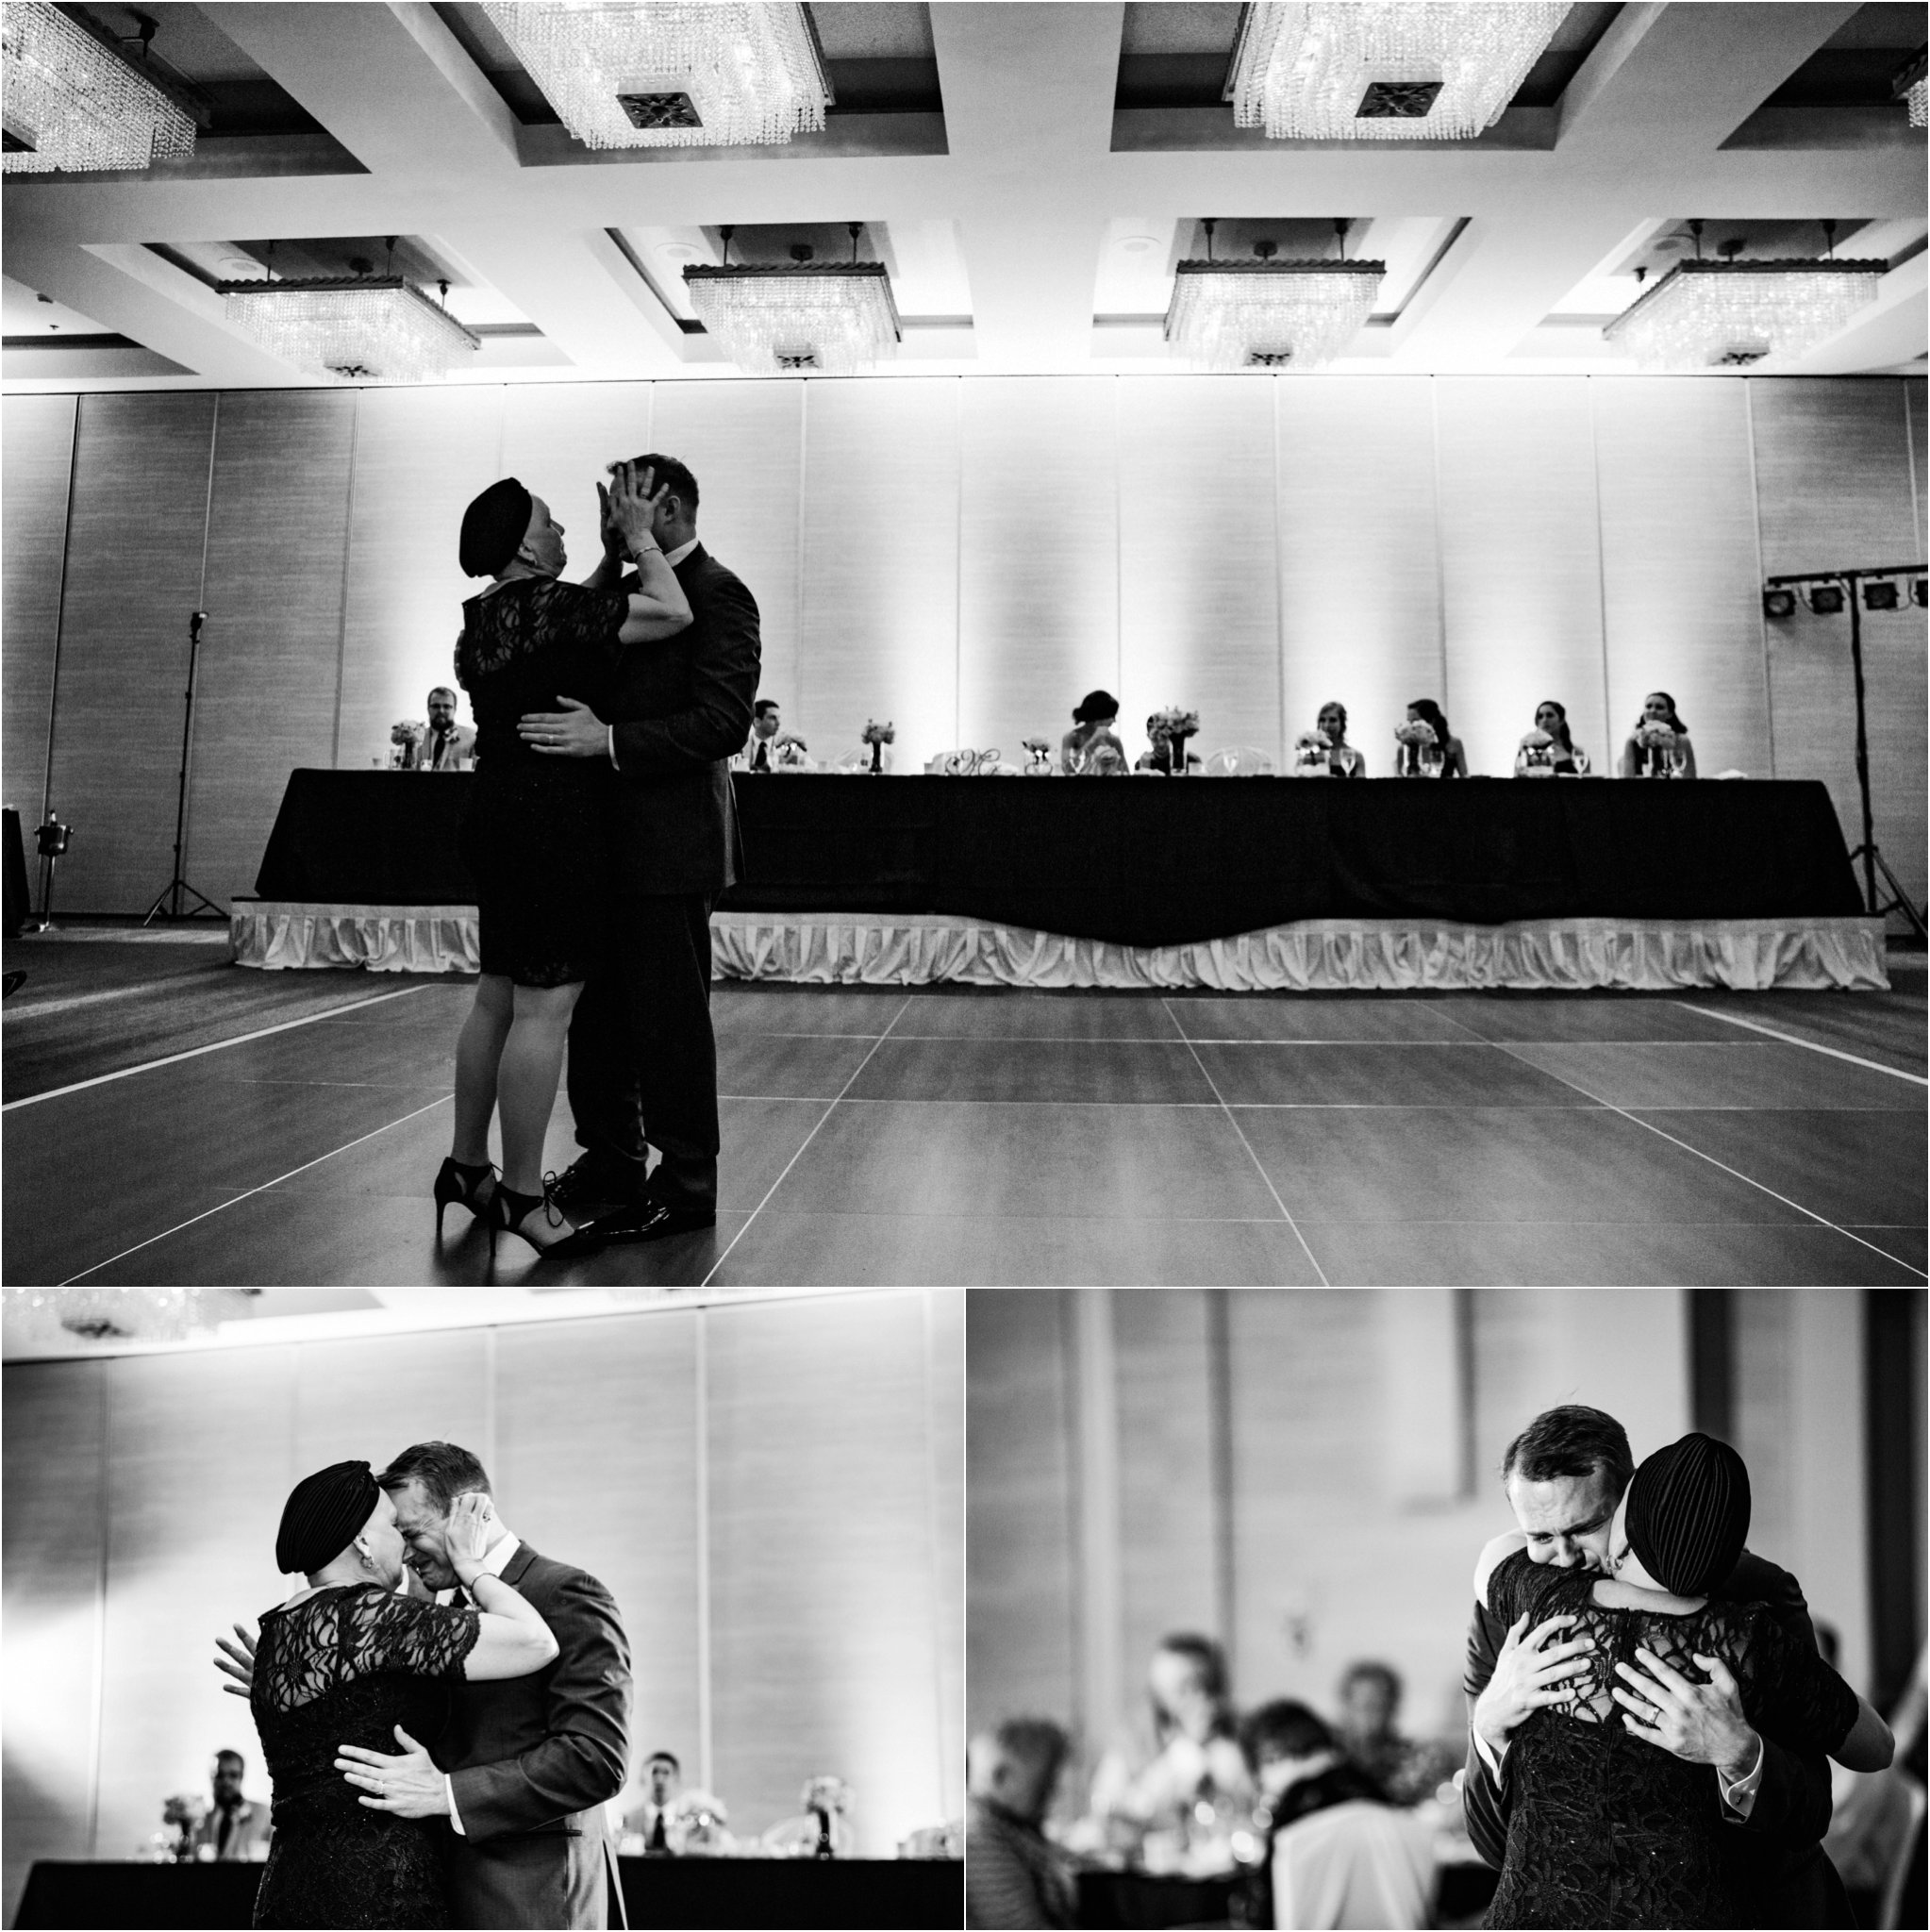 black and white | wedding | wedding photos | wedding photography | images by feliciathephotographer.com | Country Club Plaza | Kansas City | The Marriott | Unity Temple | reception venue | reception activities | mother son dance | emotional | candid 